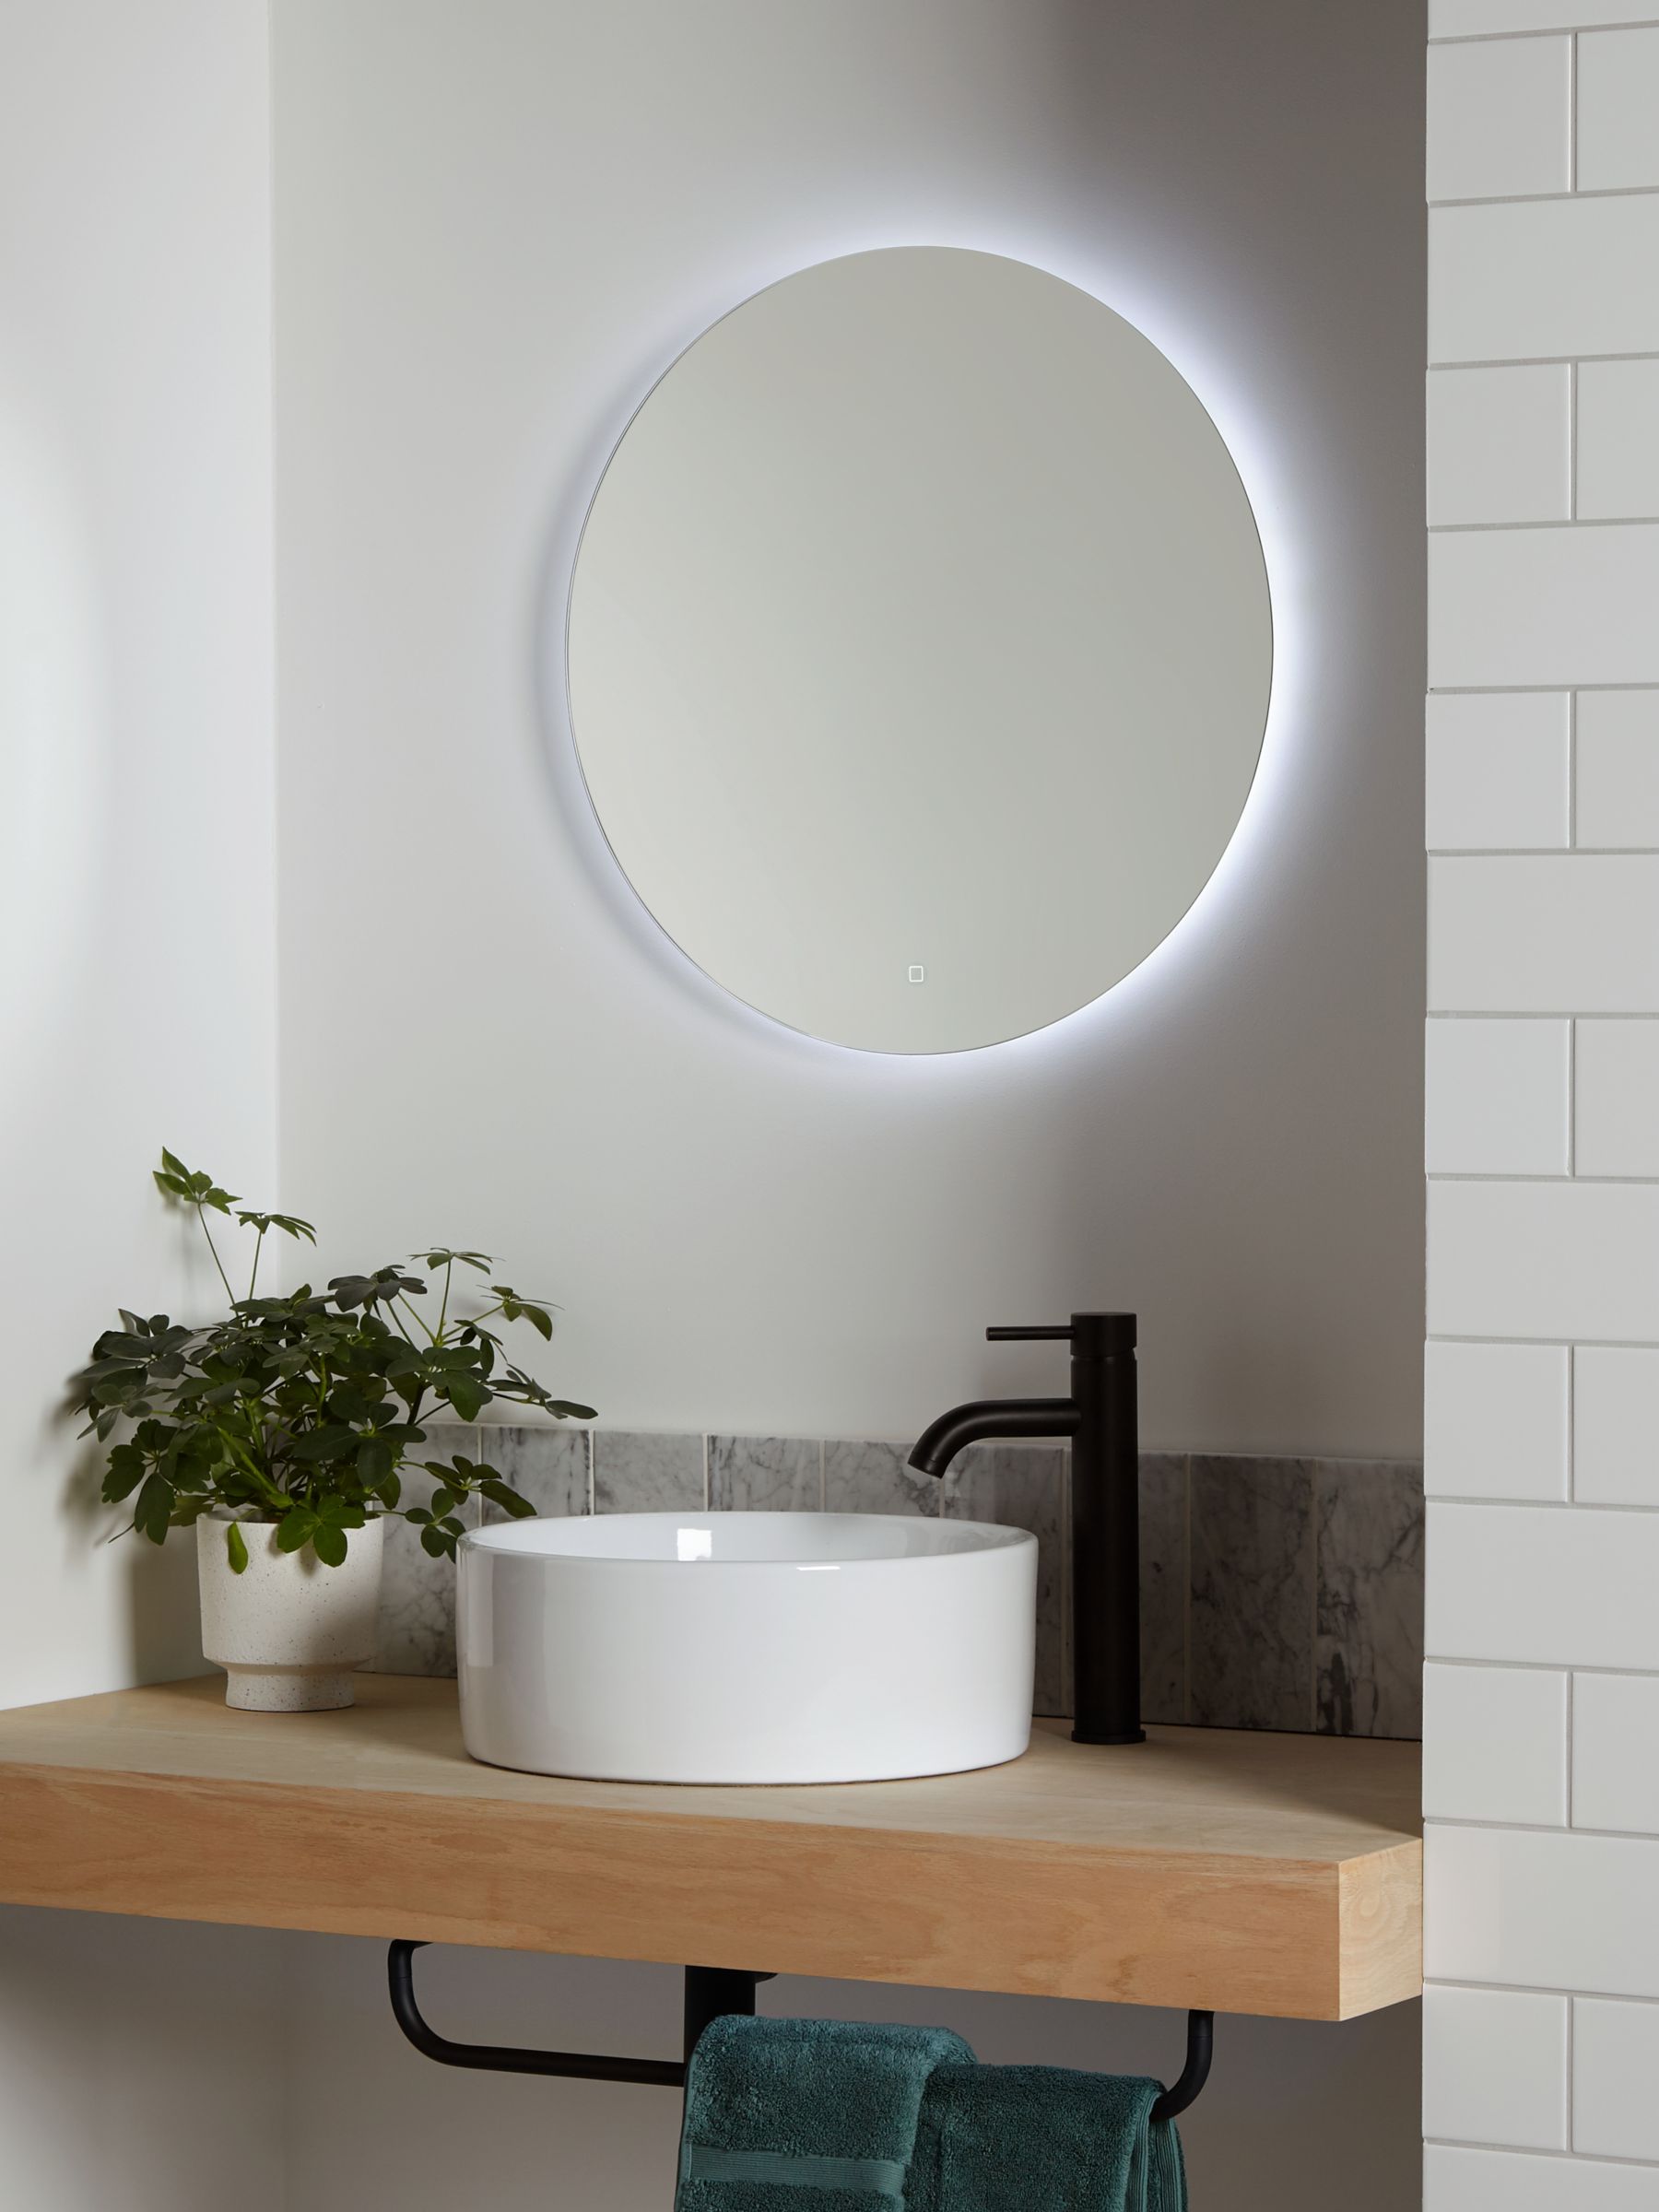 John Lewis Partners Halo Wall Mounted, Large Round Mirror With Light Behind